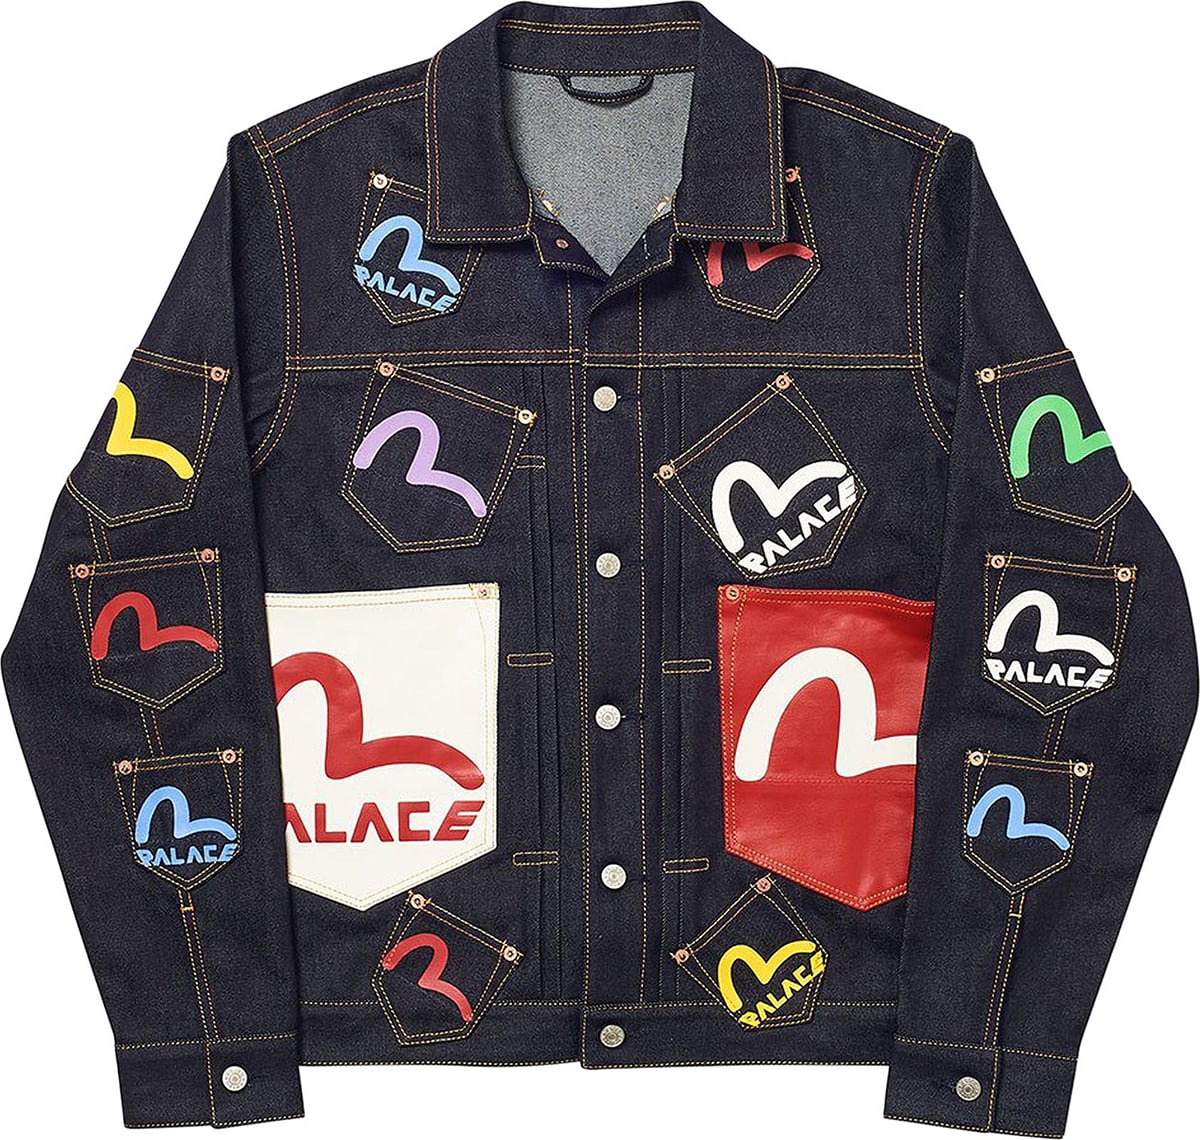 This denim jacket is decorated with multiple pockets and a mix of Palace logo and Evisu's signature seagull